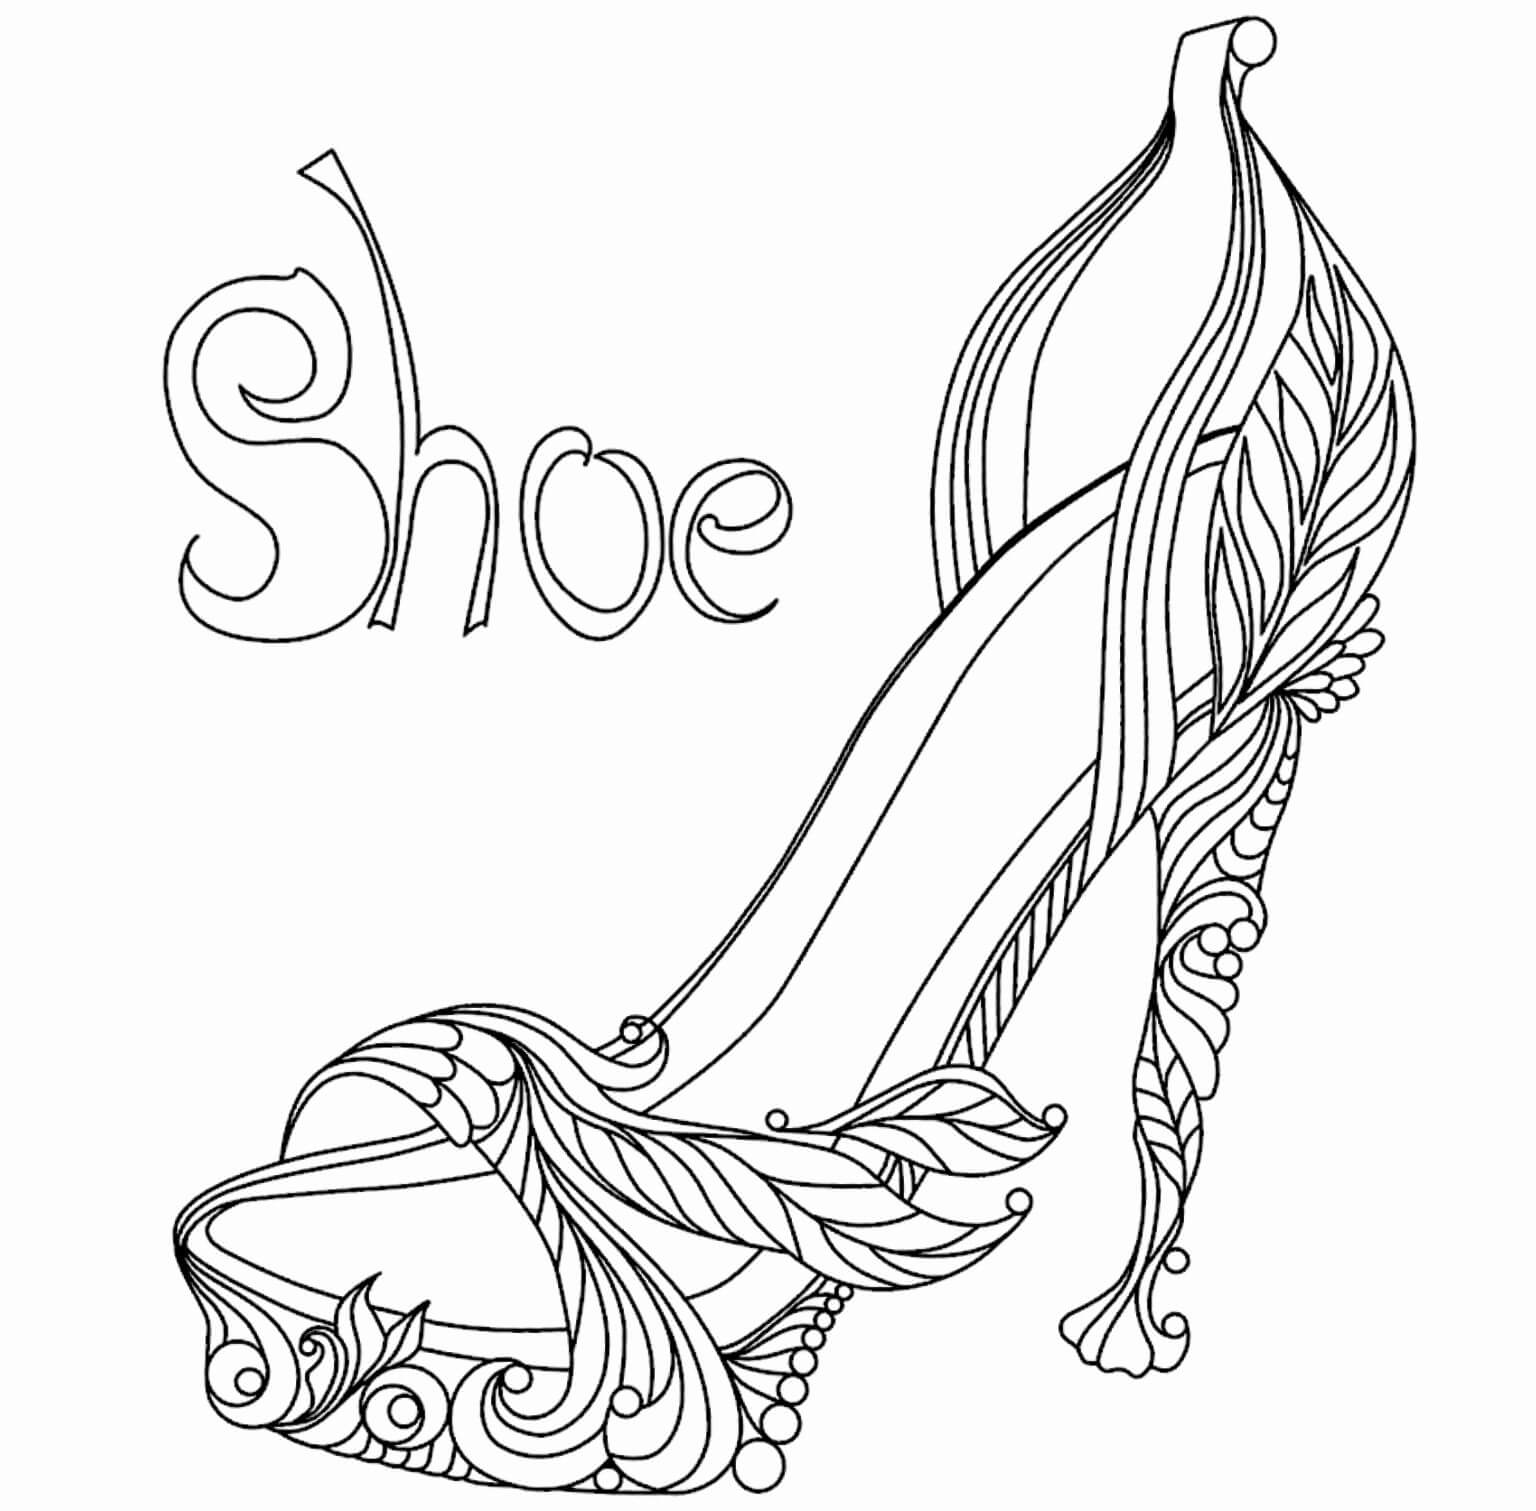 High Heel Drawing Template At Paintingvalley | Explore Intended For High Heel Shoe Template For Card